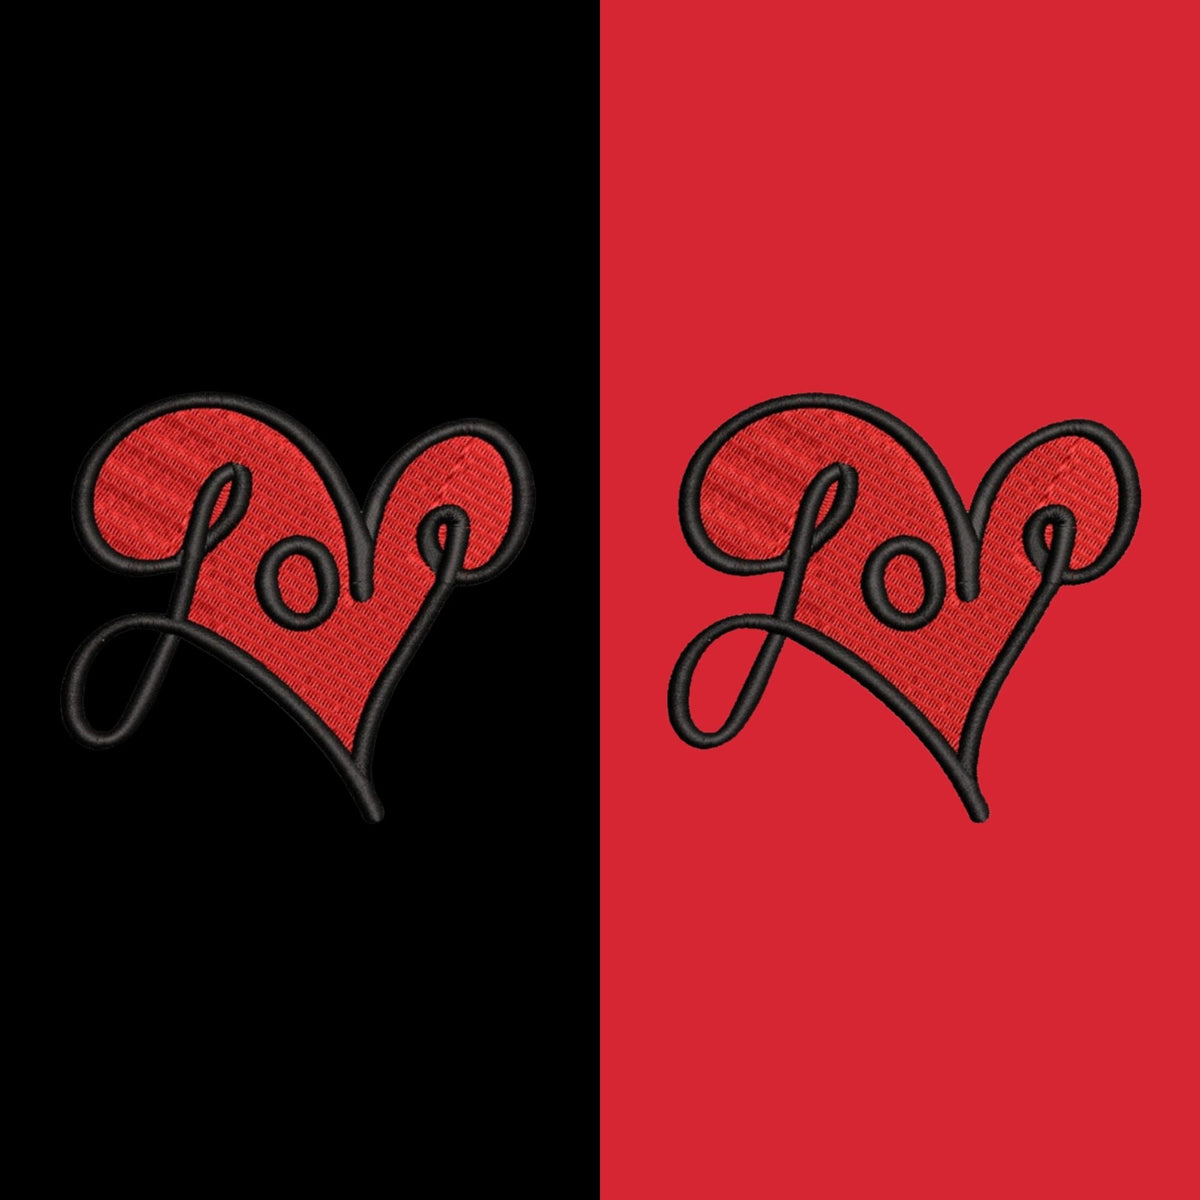 love-heart-black-and-red-embroidered-couple-hoodies-design-gogirgit-com